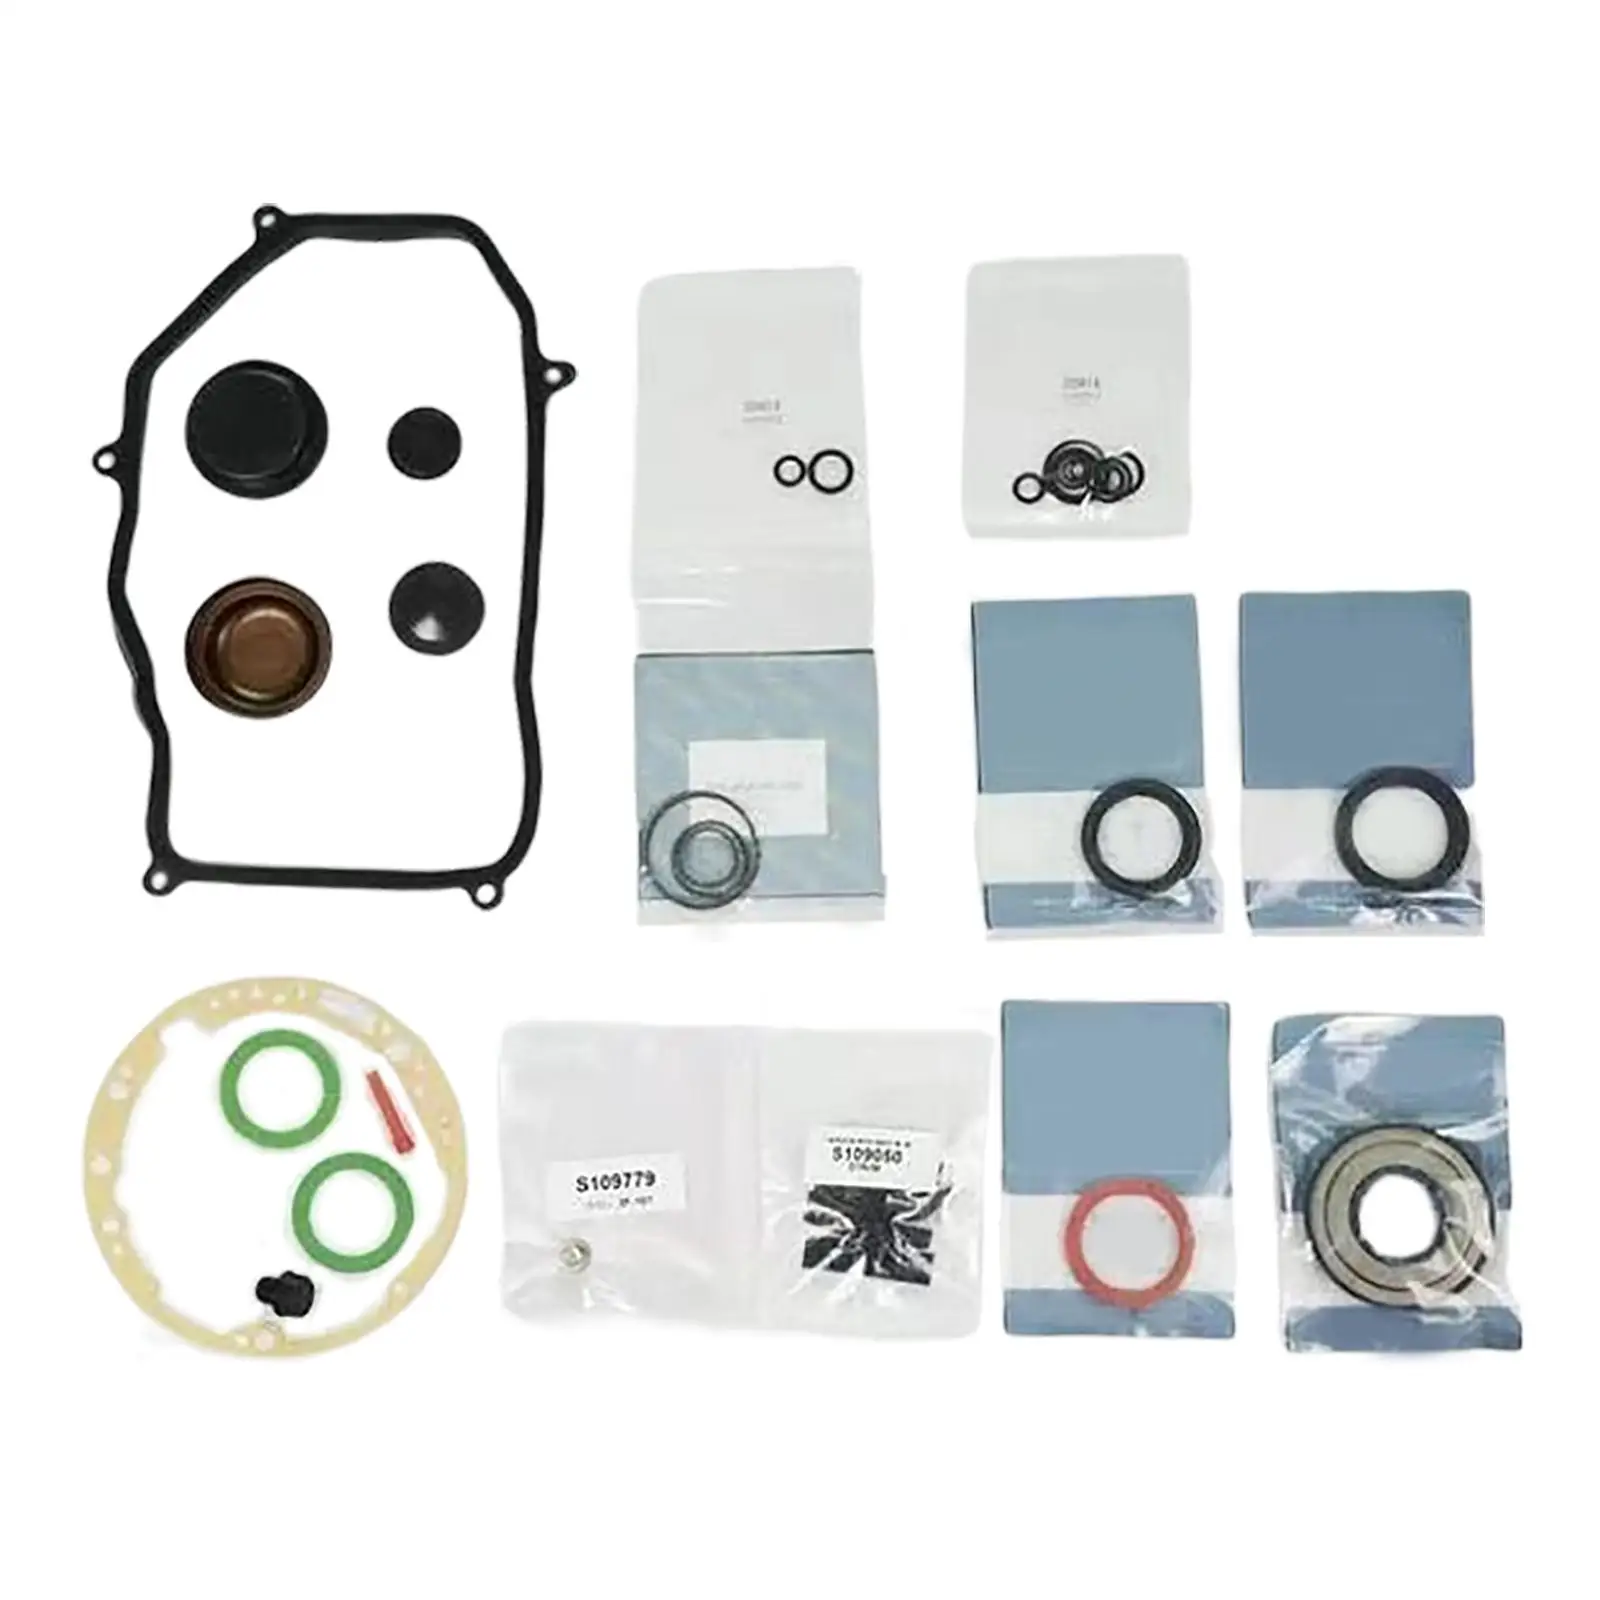 Automatic 01M  Transmission Seal  Kit Replacement Auto Gasket   for Trans MK4 1 001 Vehicle Parts